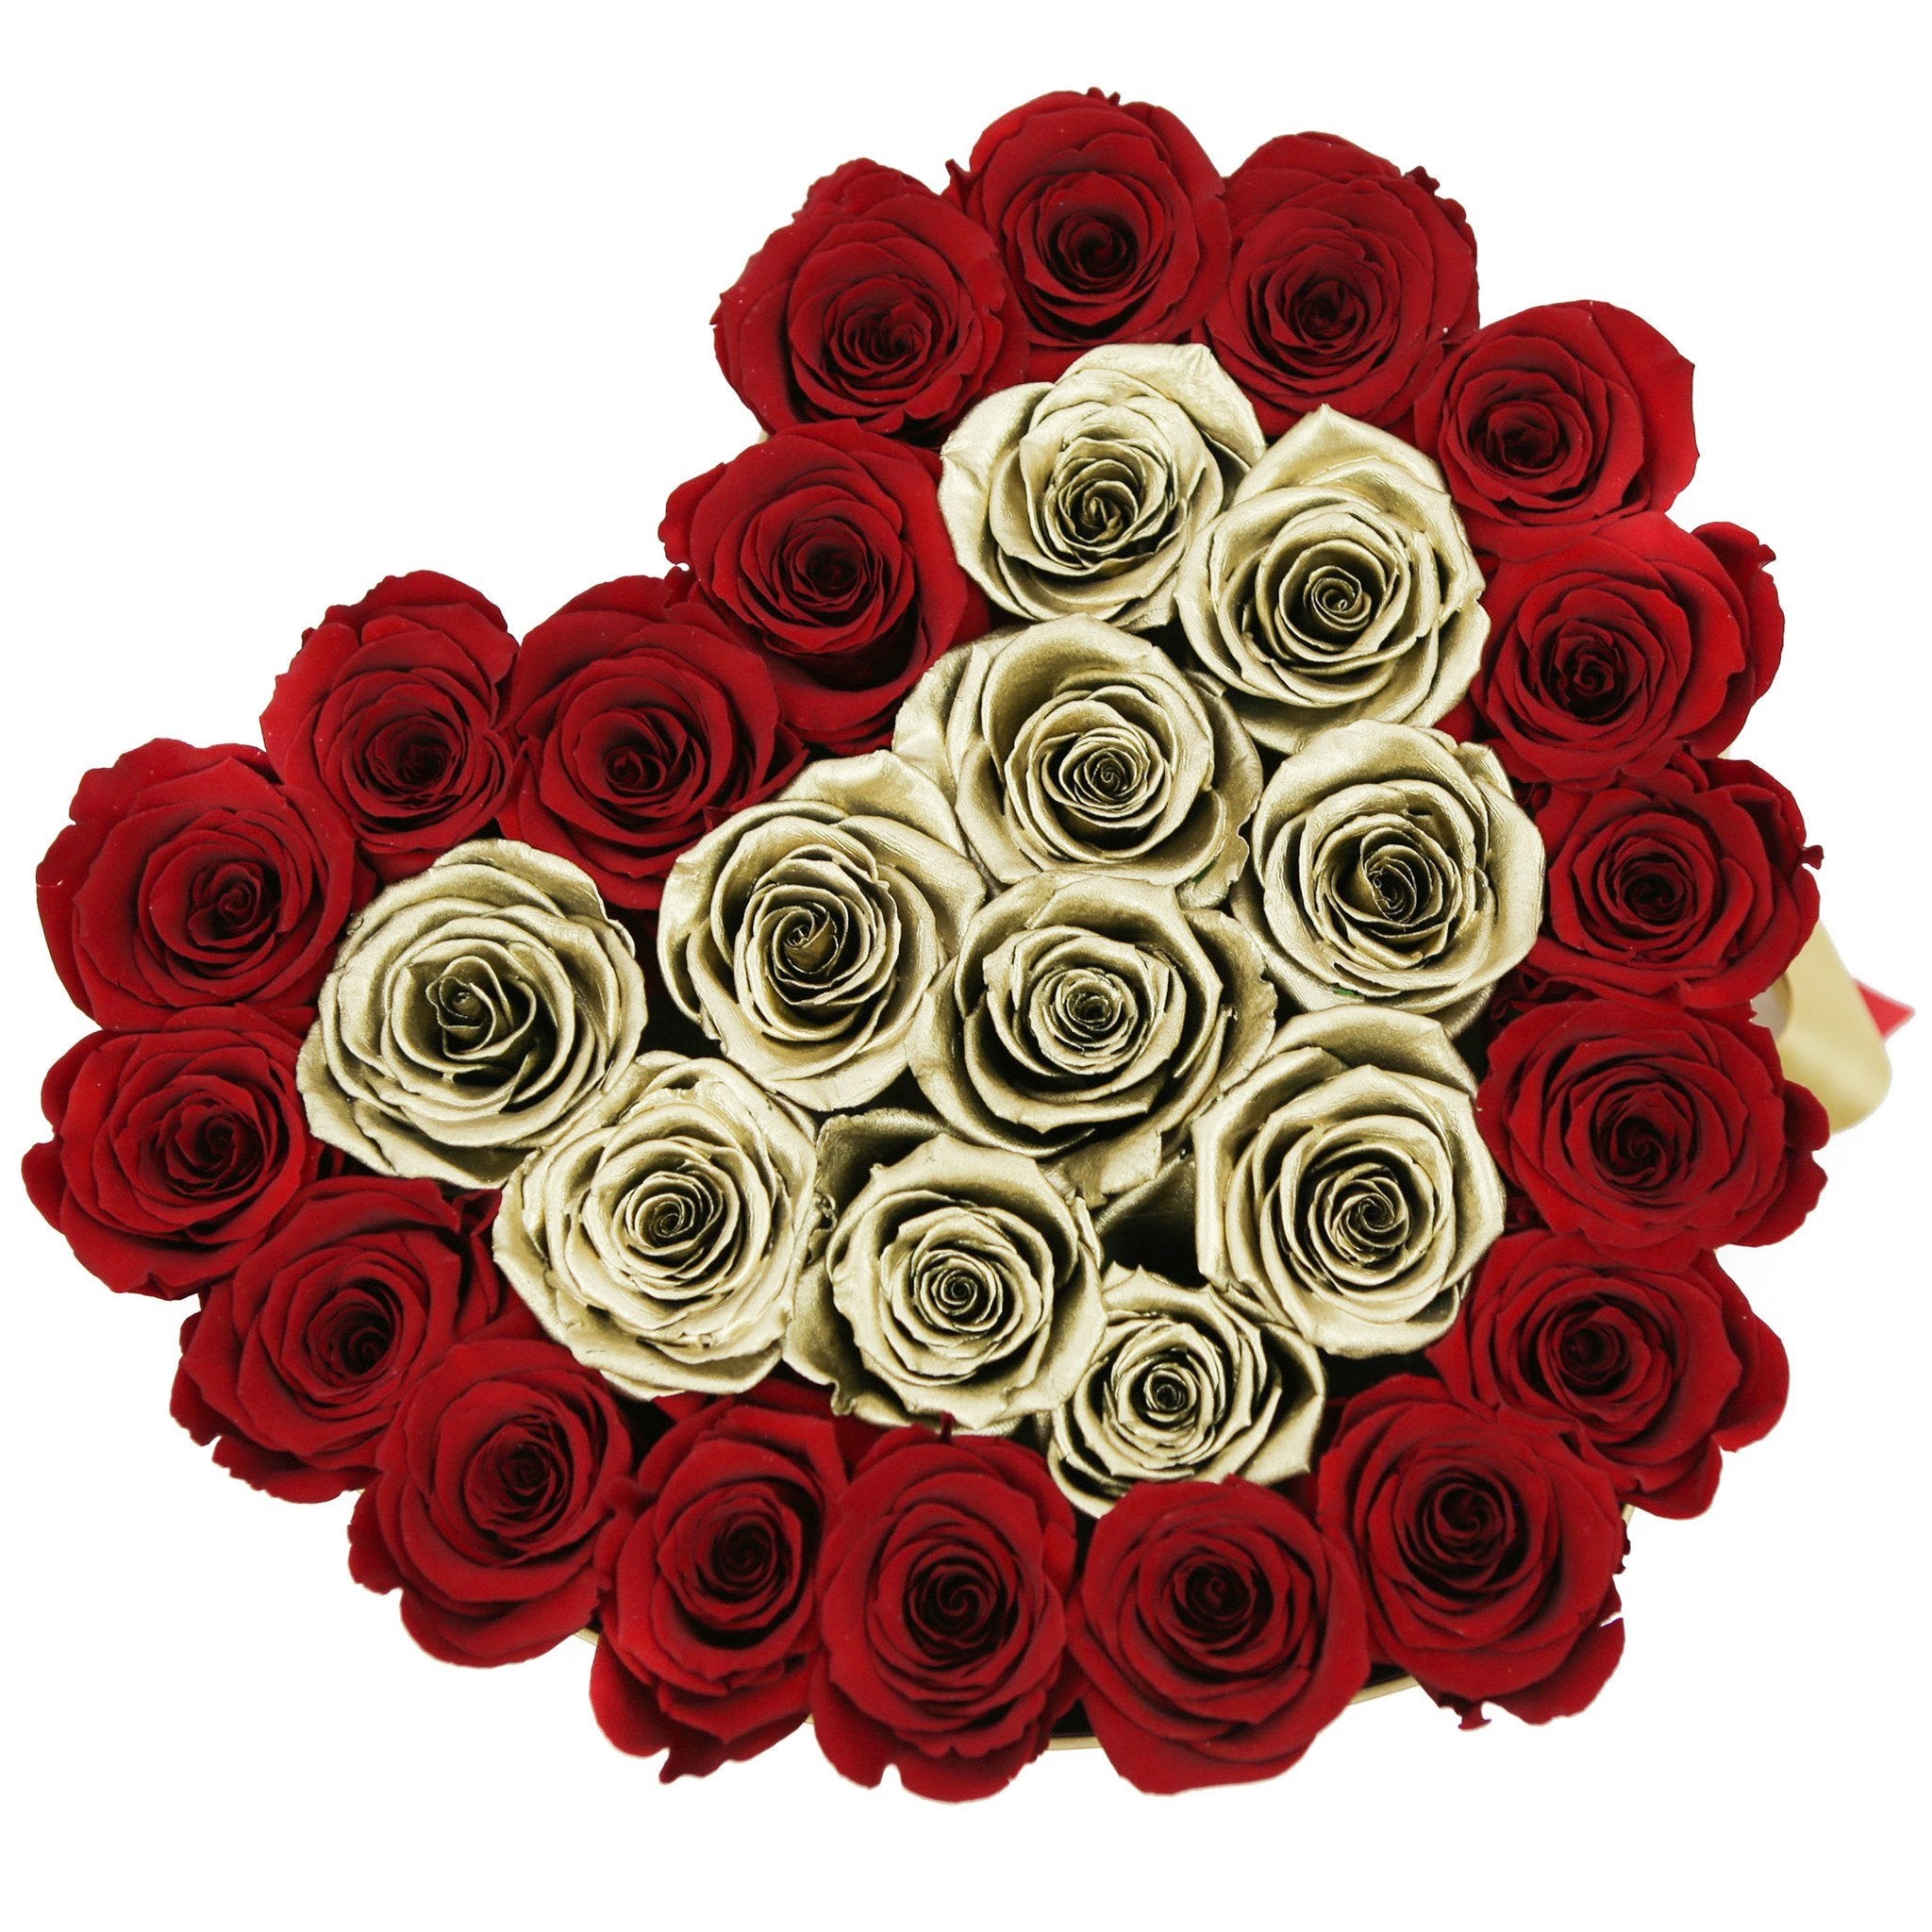 LOVE box - gold - red&gold roses mixed eternity roses - the million roses